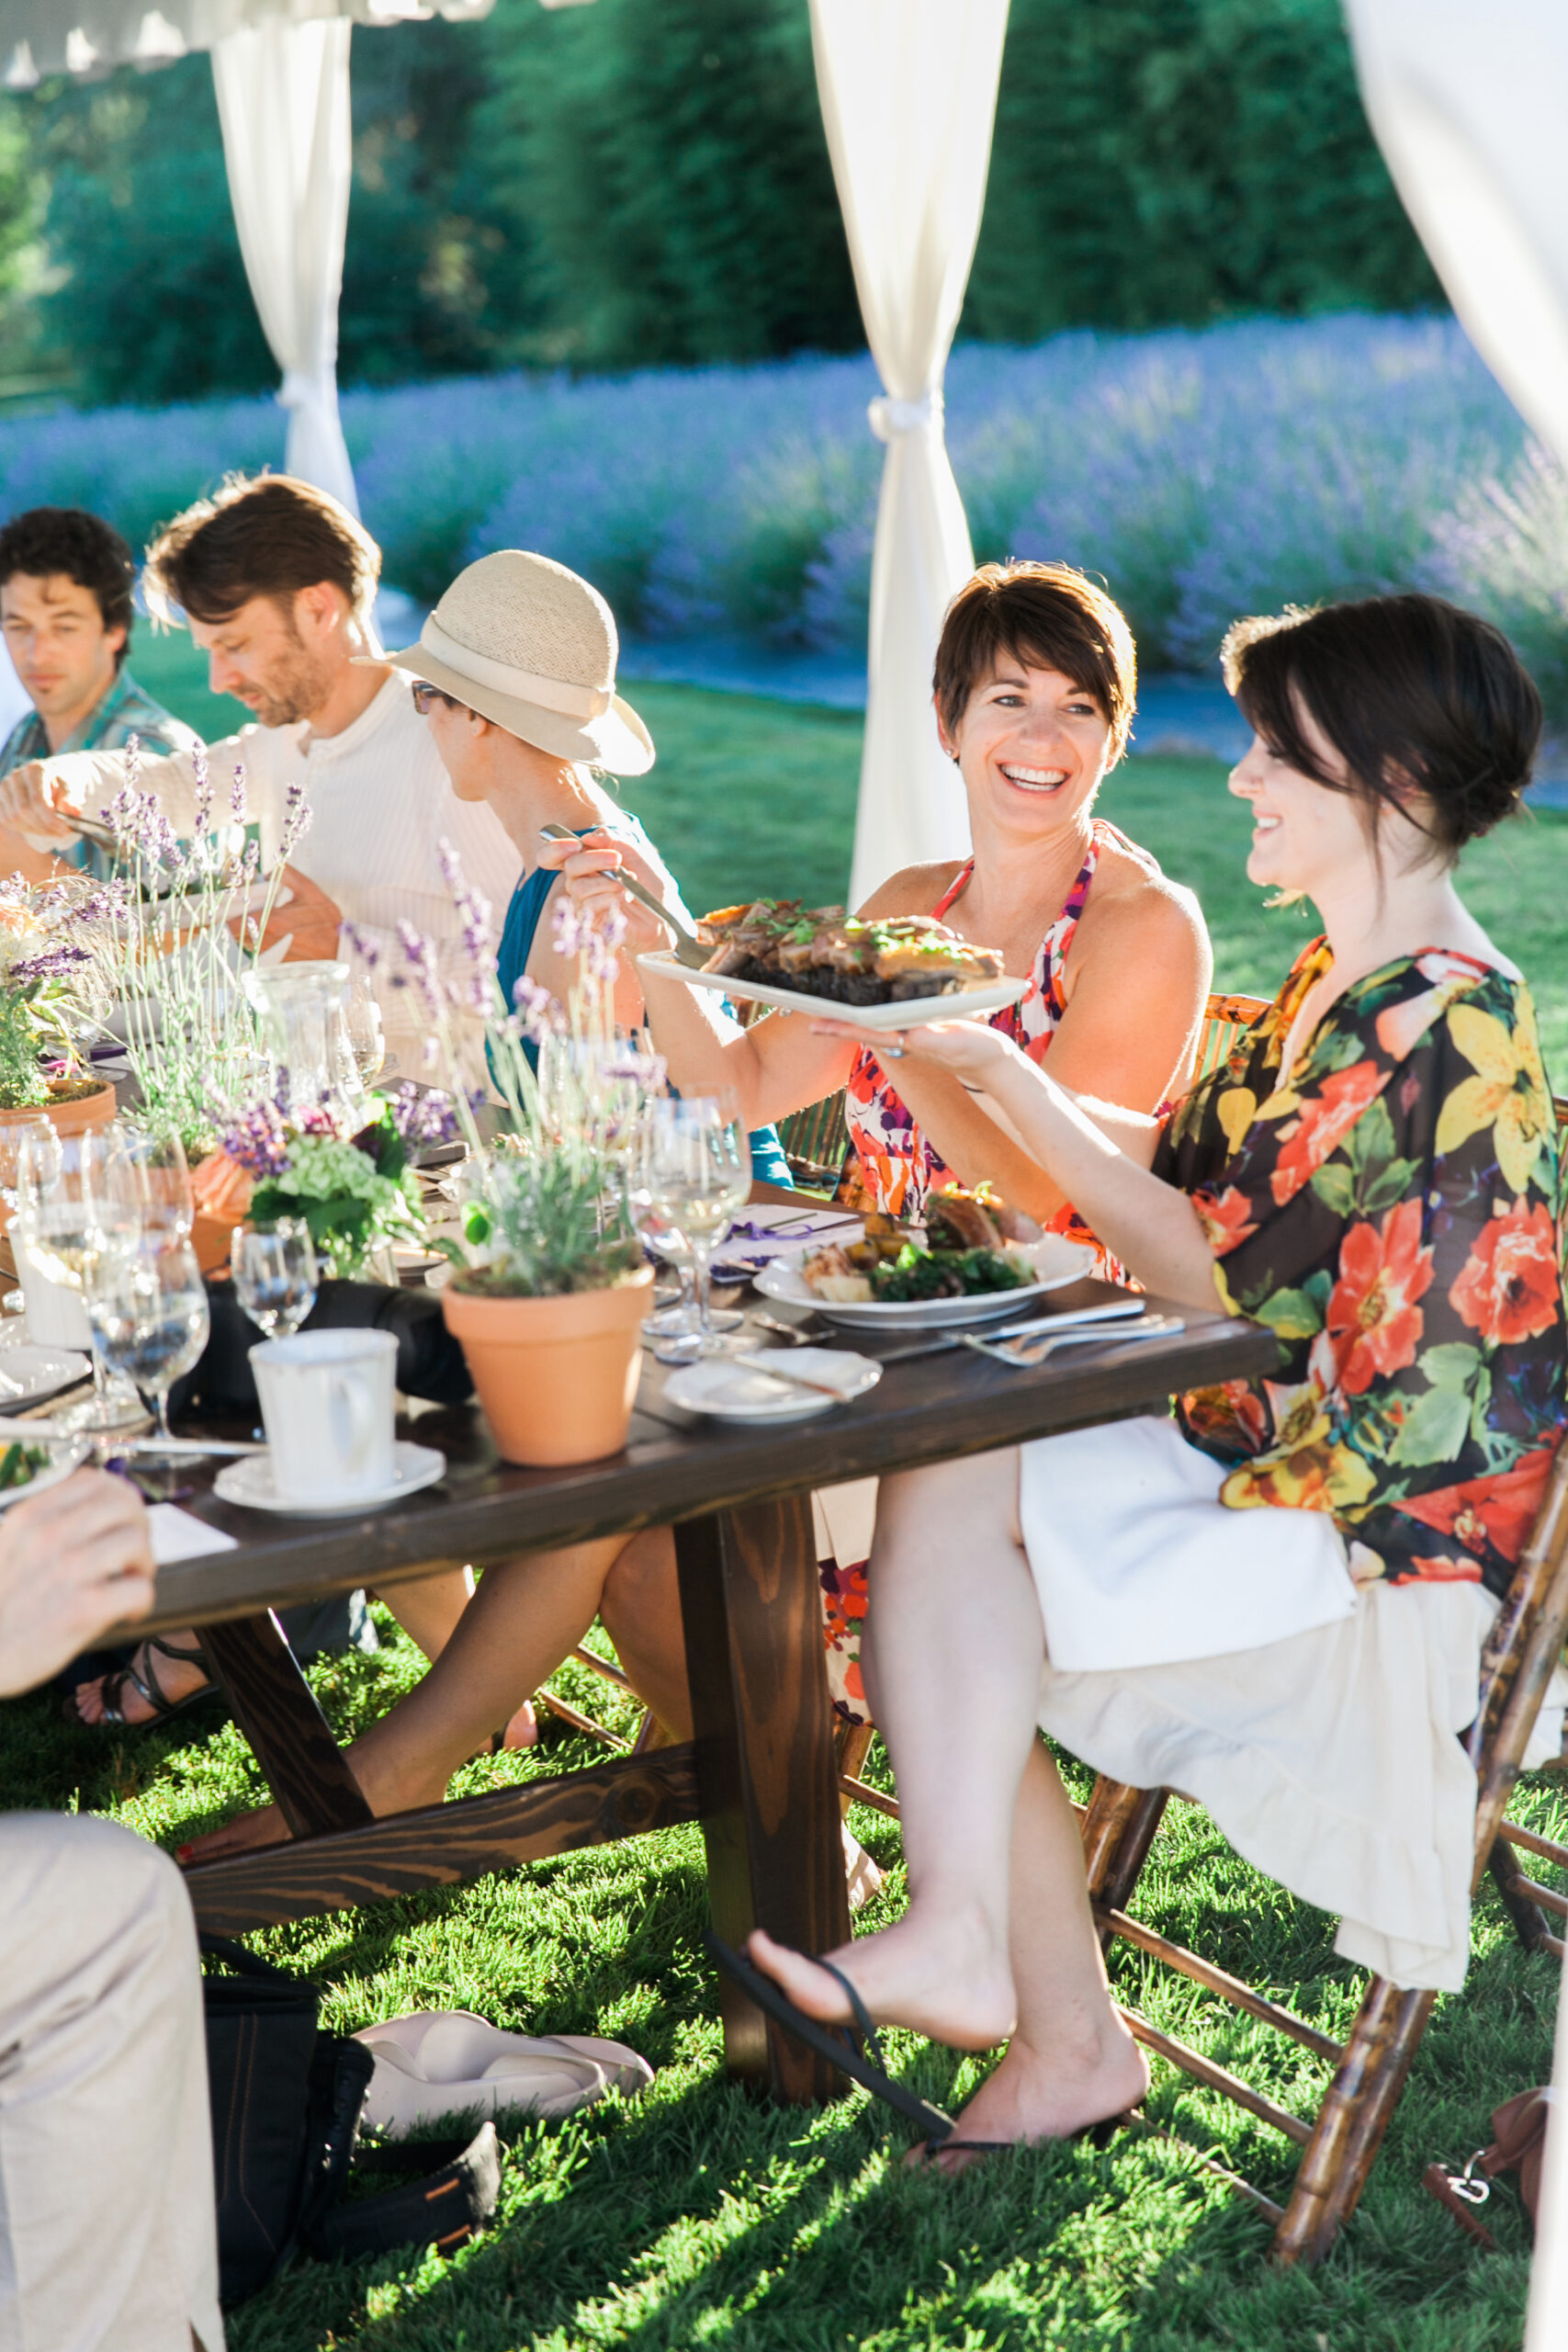 Farm to table dinner at Woodinville Lavender Farm dinner planned by Pink Blossom Events